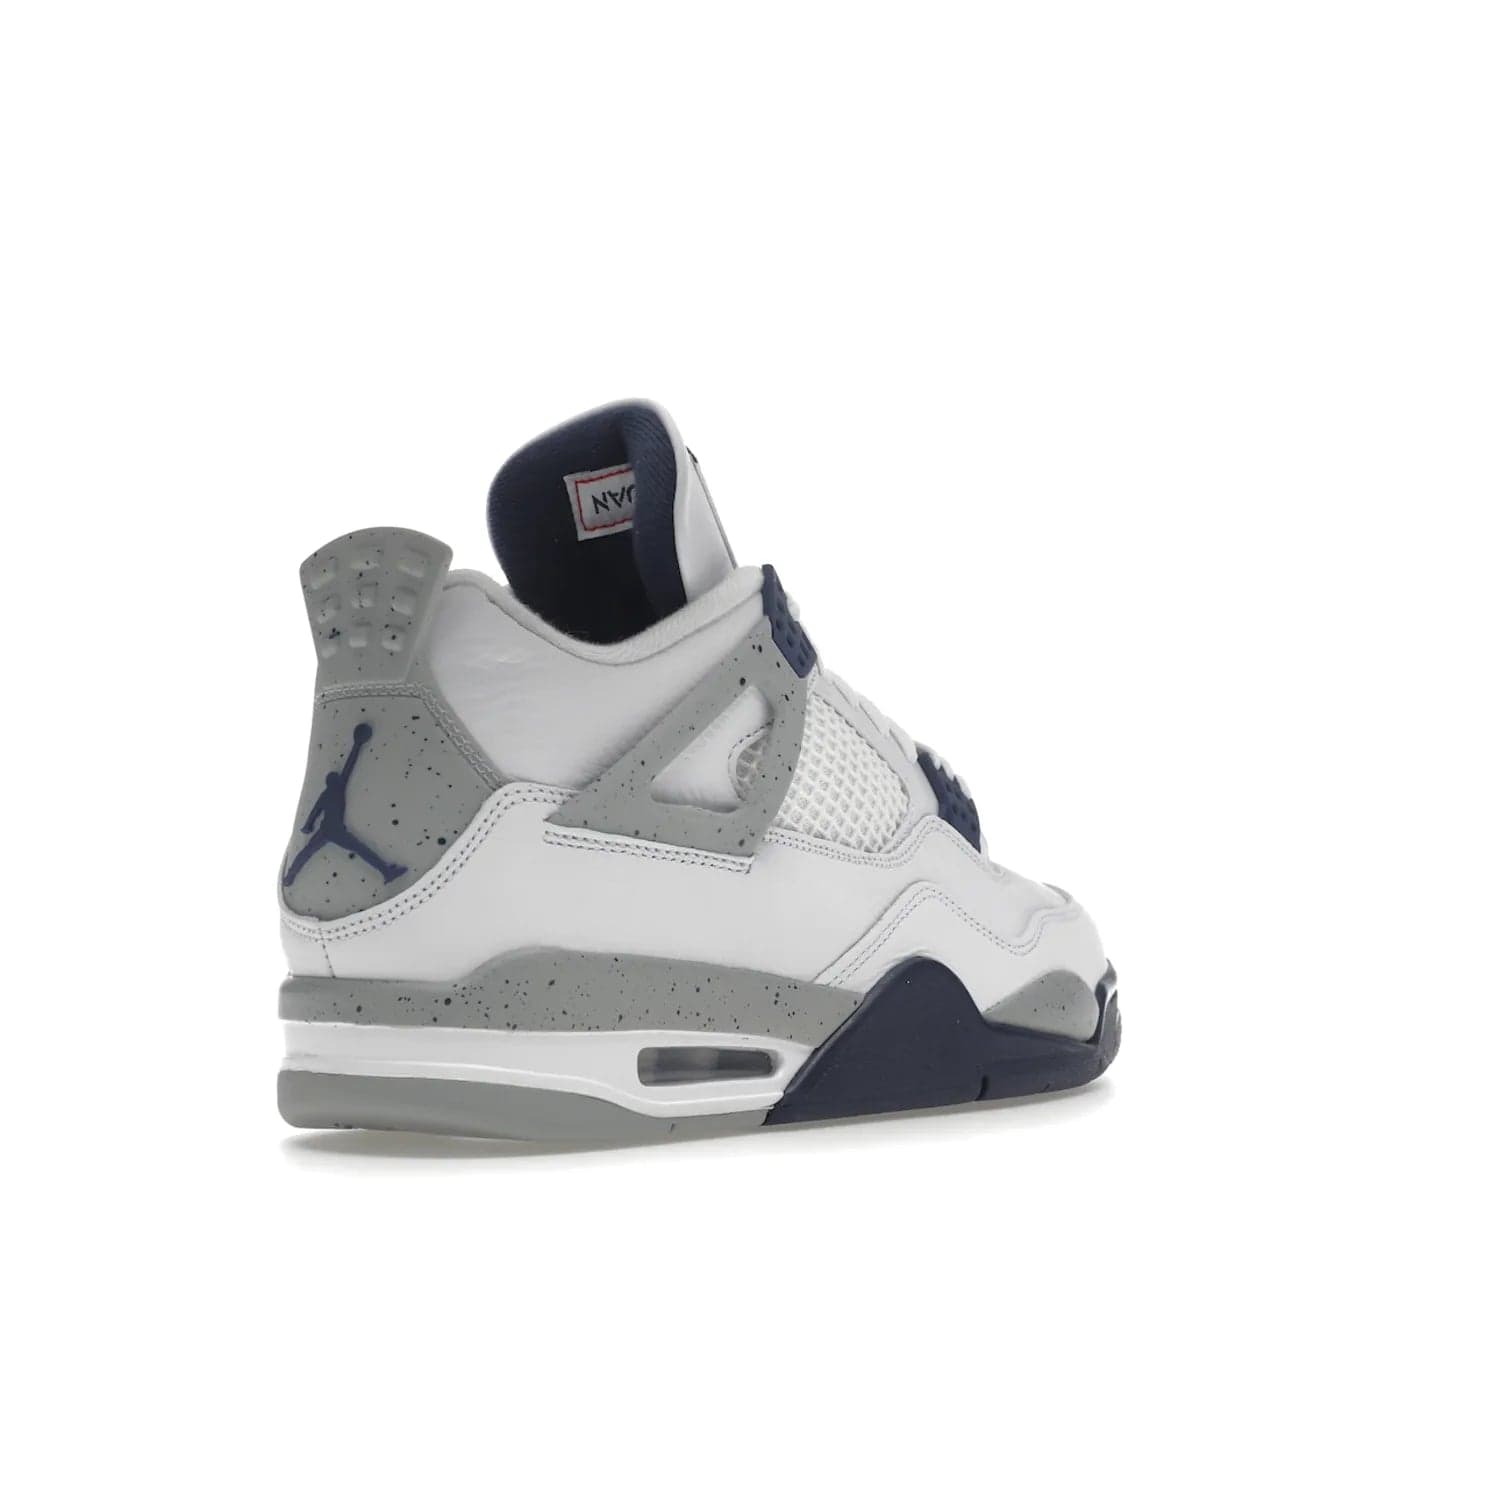 Jordan 4 Retro Midnight Navy - Image 32 - Only at www.BallersClubKickz.com - Shop the Air Jordan Retro 4 White Midnight Navy. Stand out with a classic white leather upper, black support wings, midnight navy eyelets, and Crimson Jumpman tongue tag. Unbeatable comfort with two-tone polyurethane midsole with encapsulated Air technology. Get yours before October 29th, 2022.